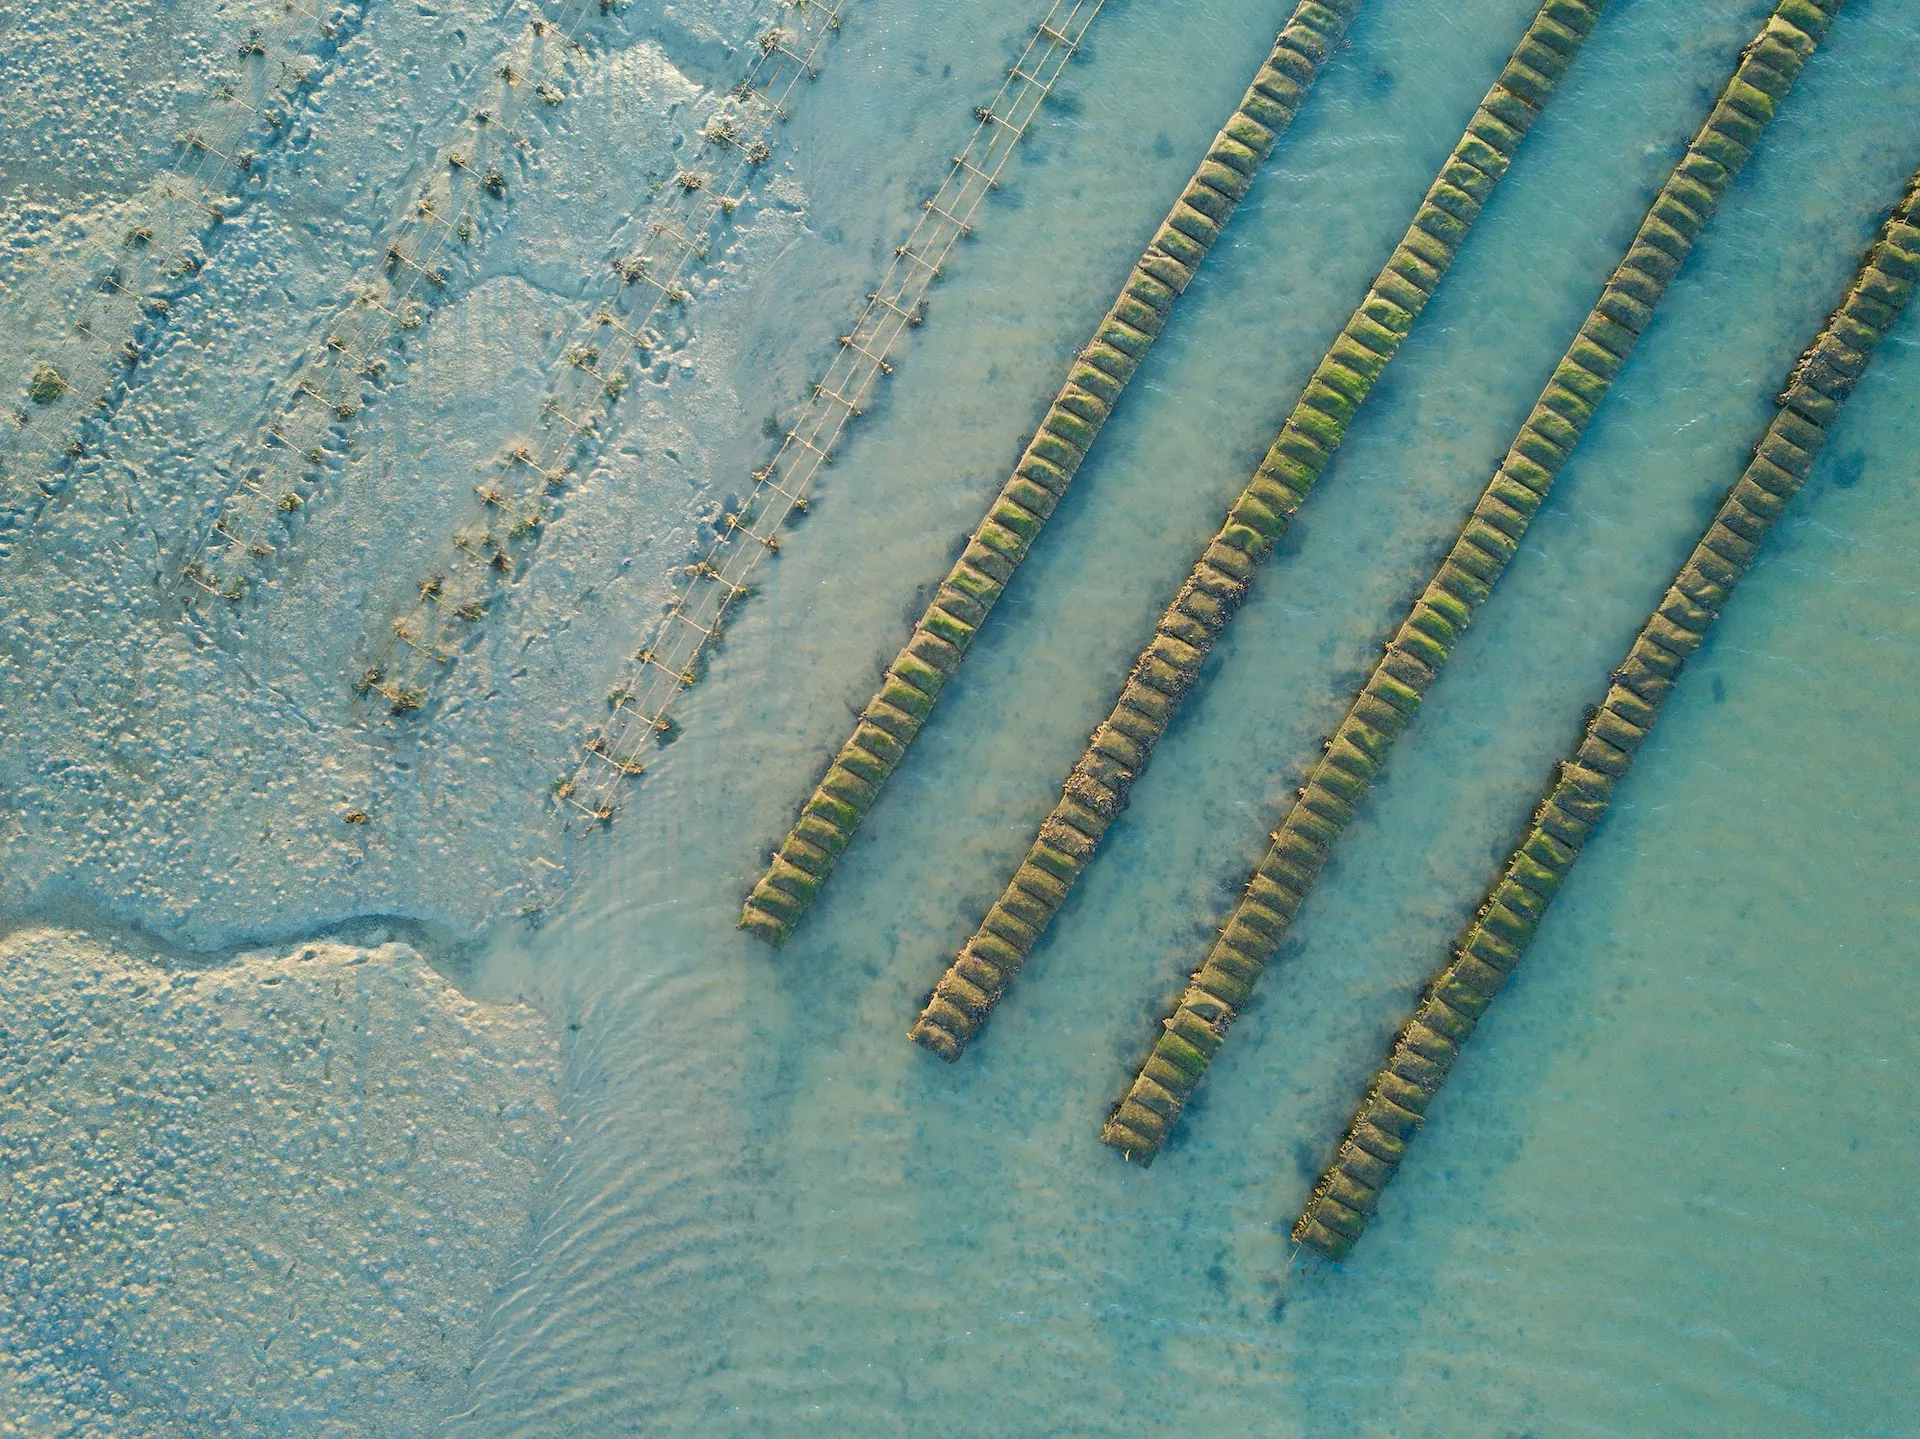 a group of mussels in the water pearl farm